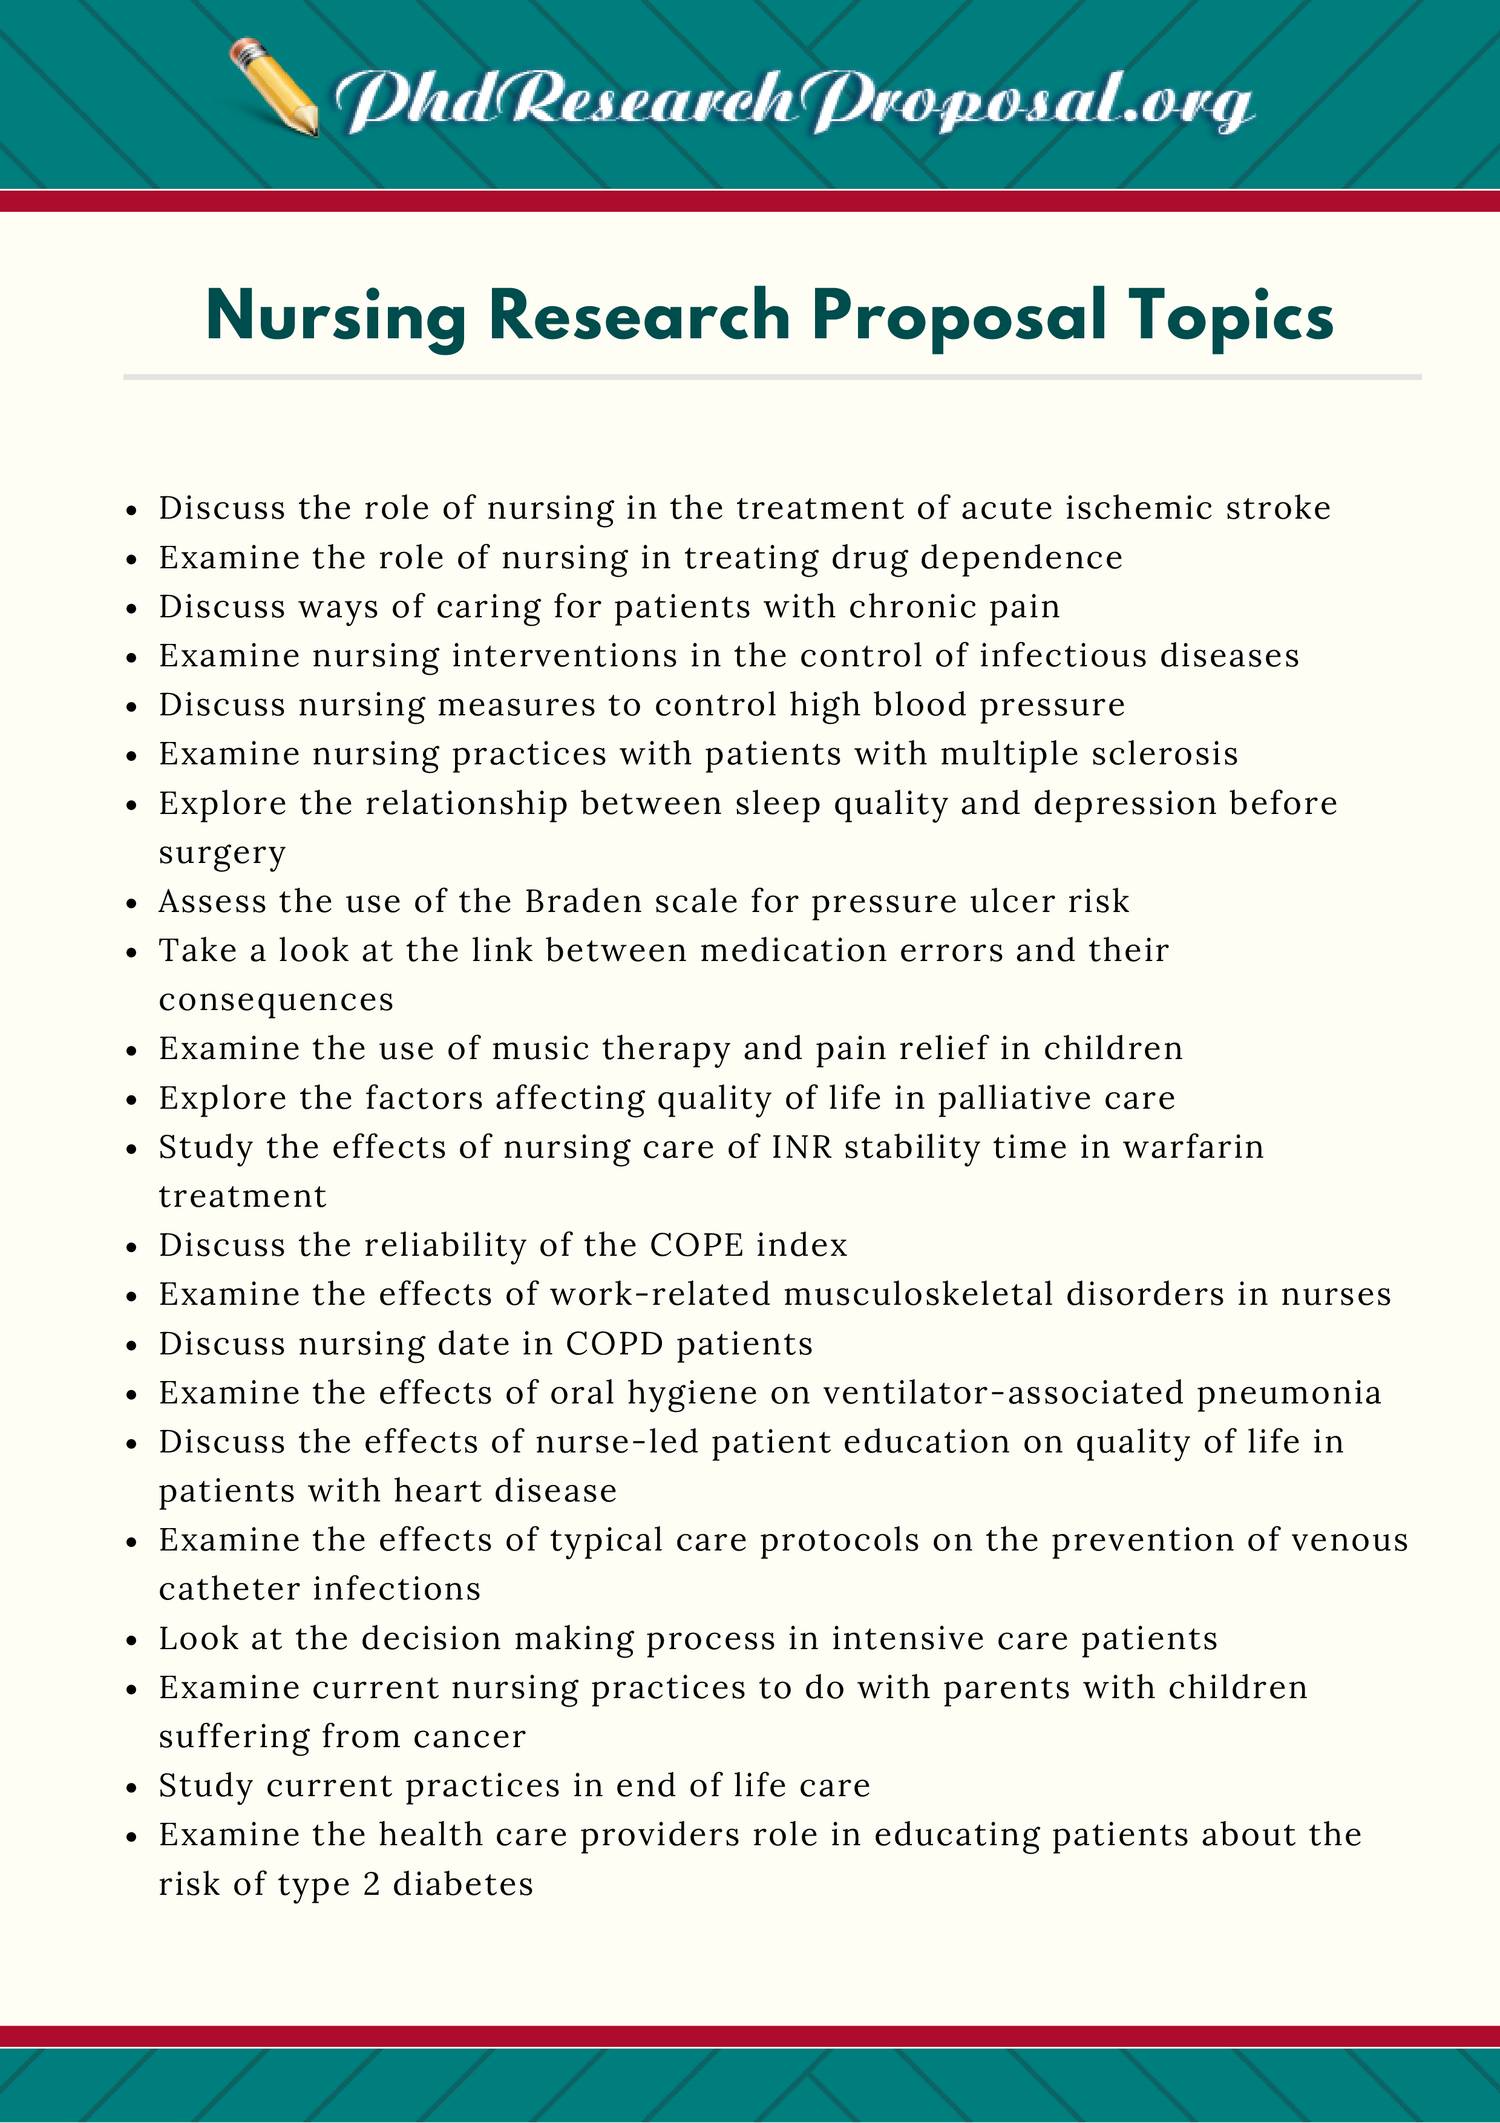 good research topics for nursing students